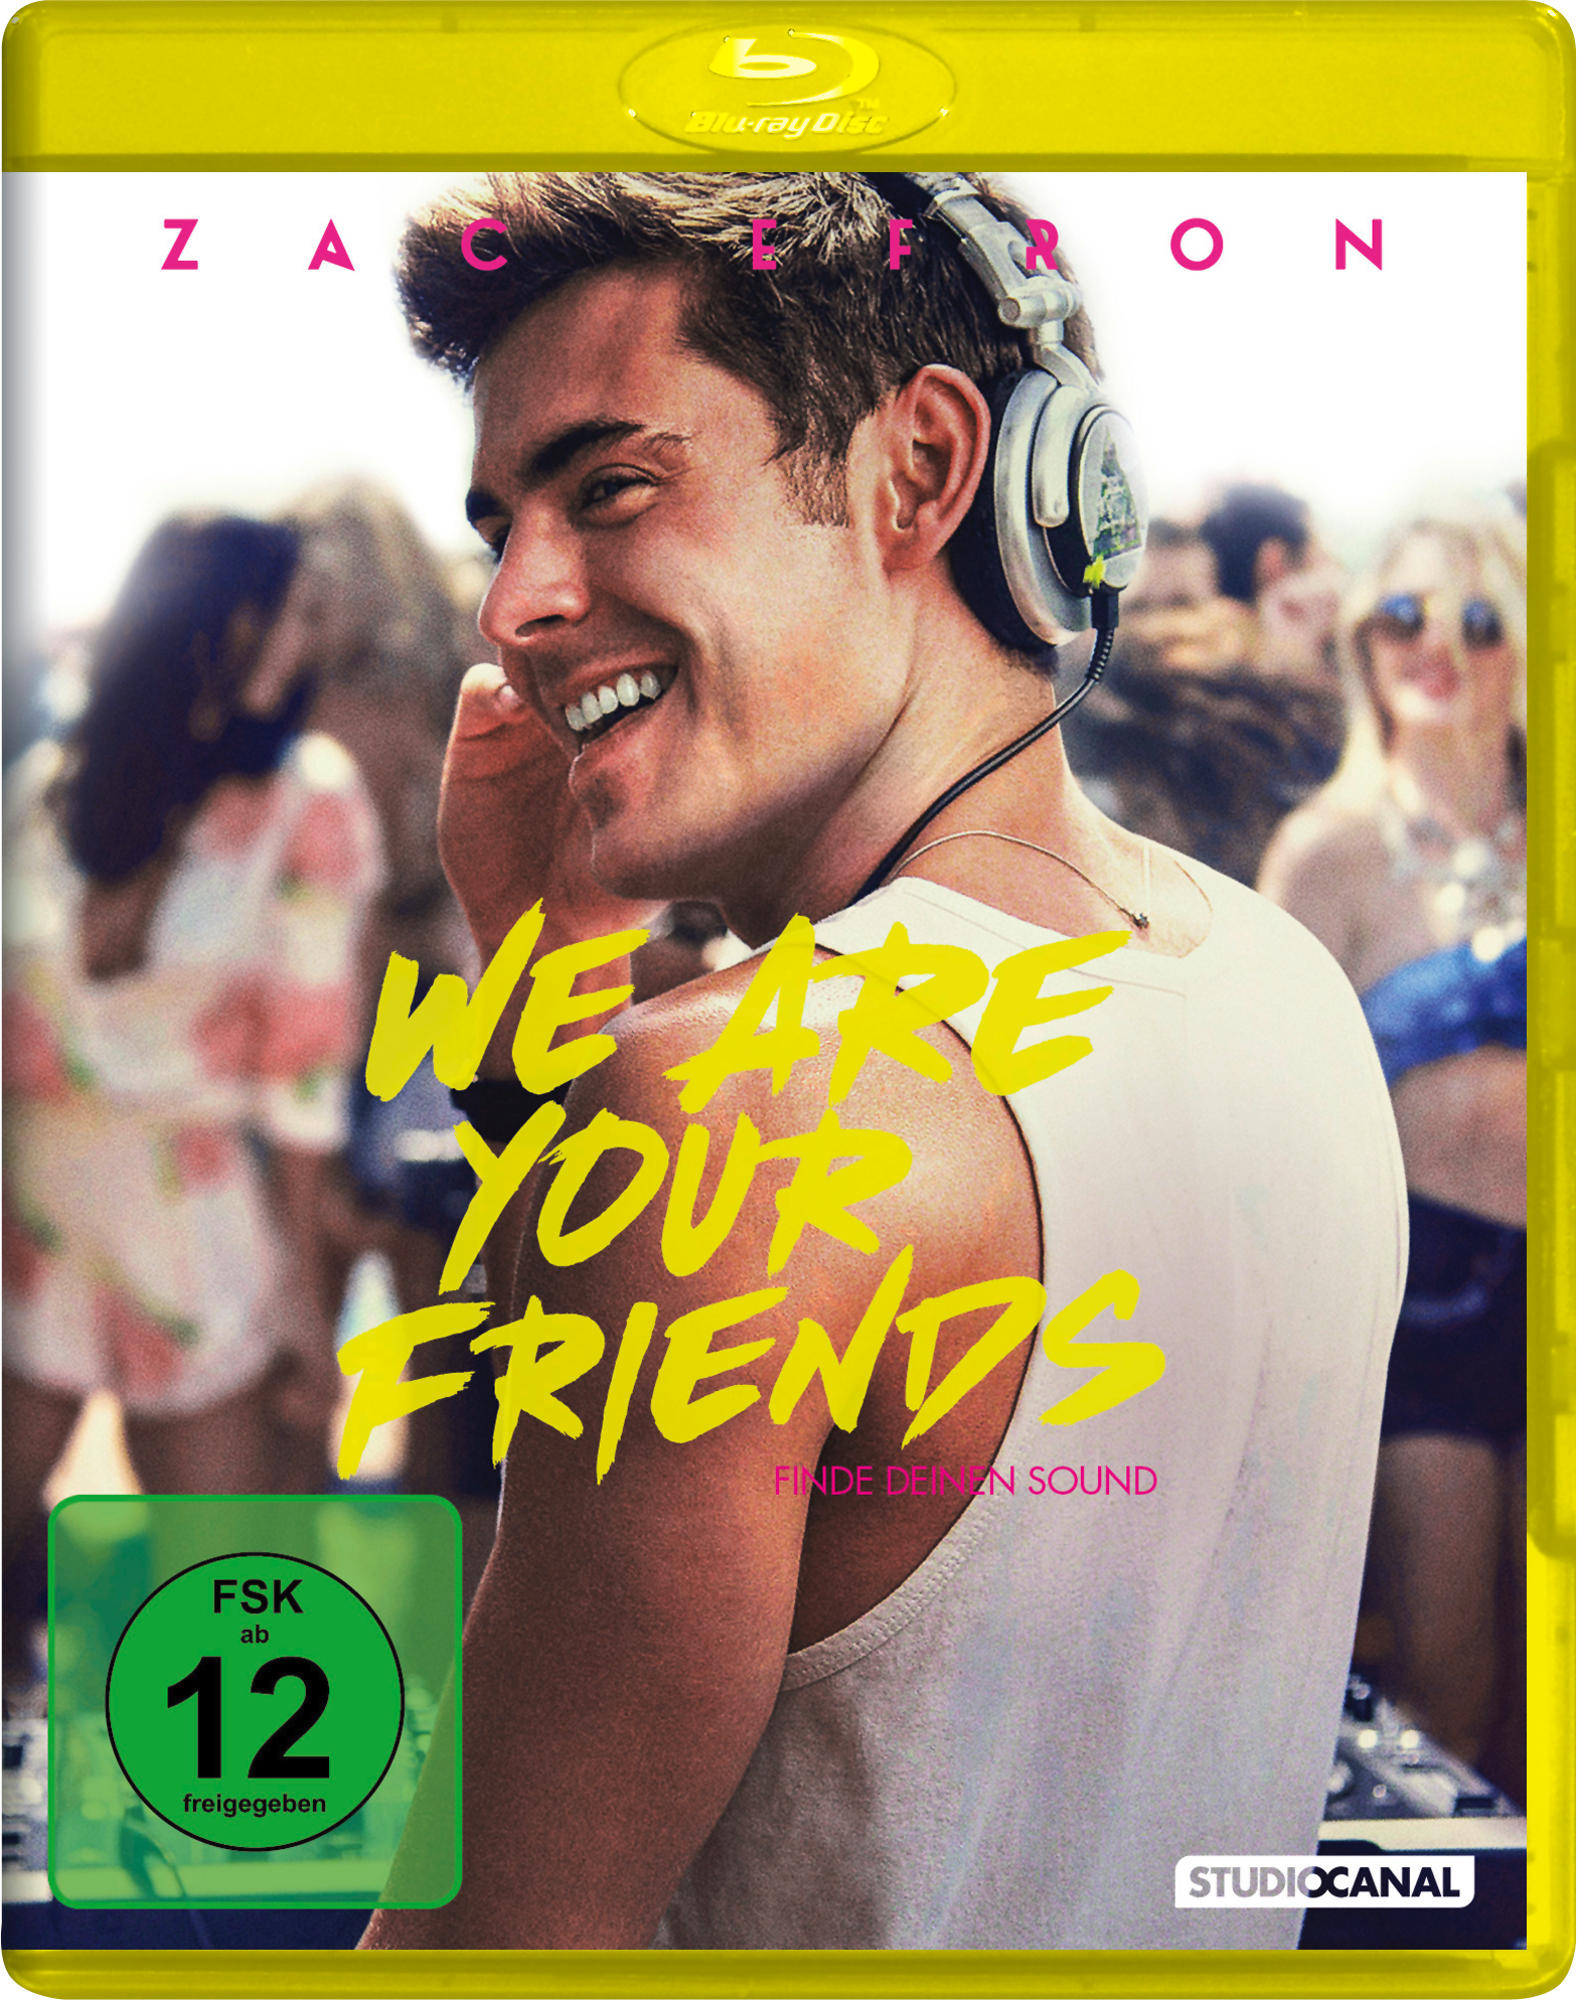 Friends Your Blu-ray We Are